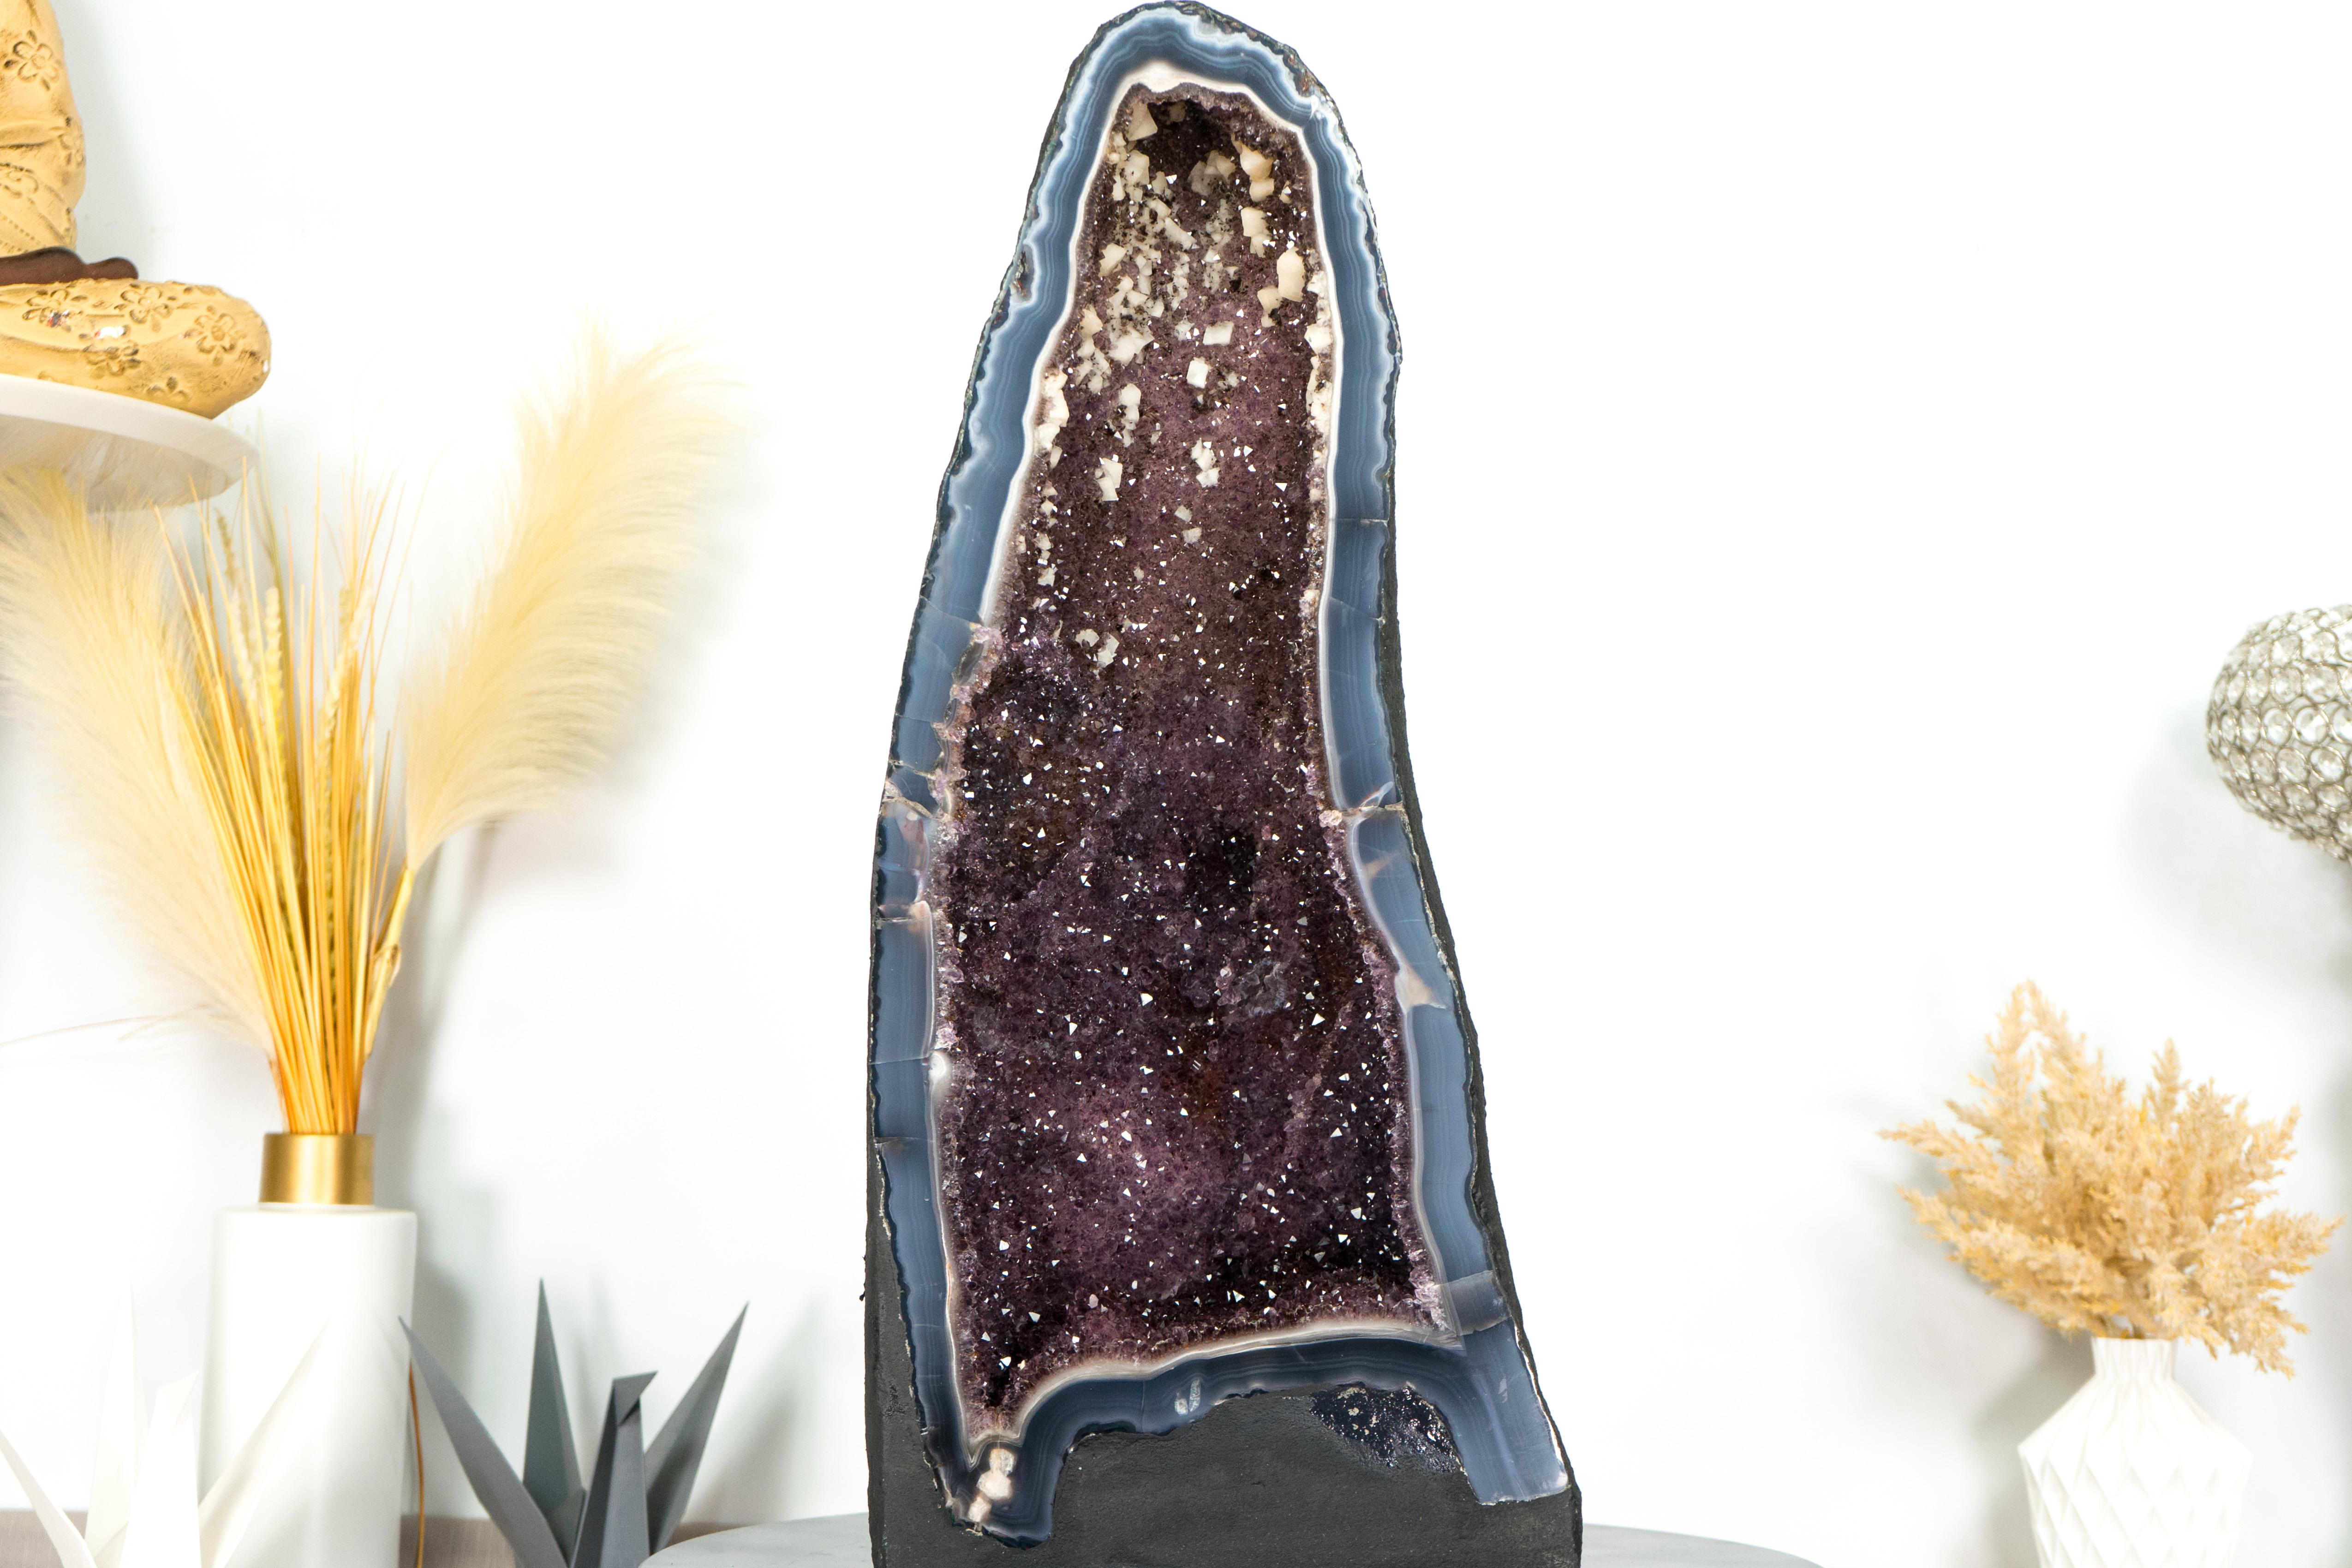 With spectacular blue banded agates, rare, beautiful aesthetics, added with spectacular shiny Amethyst that complements everything, this Agate with Amethyst Geode is a spectacular all-natural artwork that deserves a center space in your office,